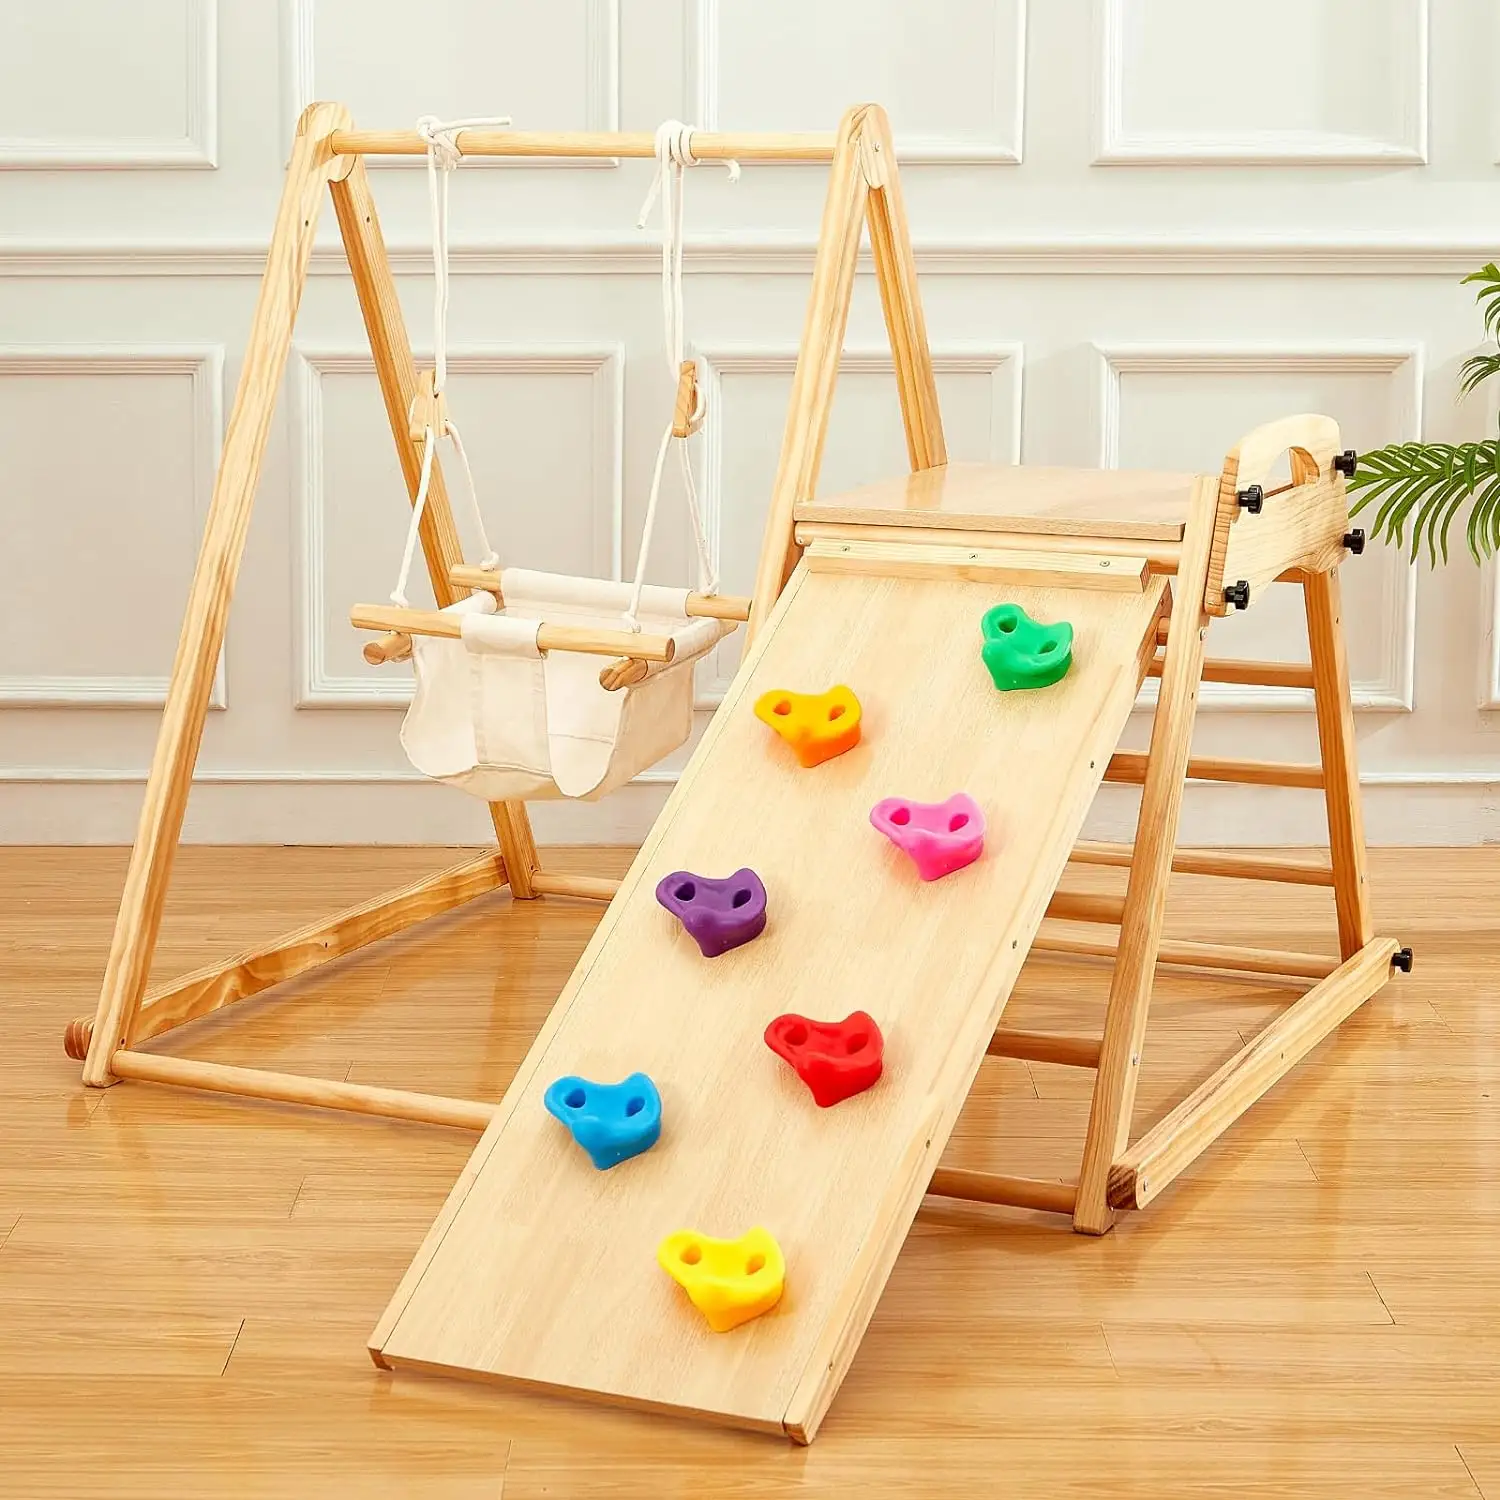 4-in-1 Wooden Toddler Swing and Slide Set Foldable Montessori Gym Indoor Playground With Swing Slide Ladder Climbing Rock